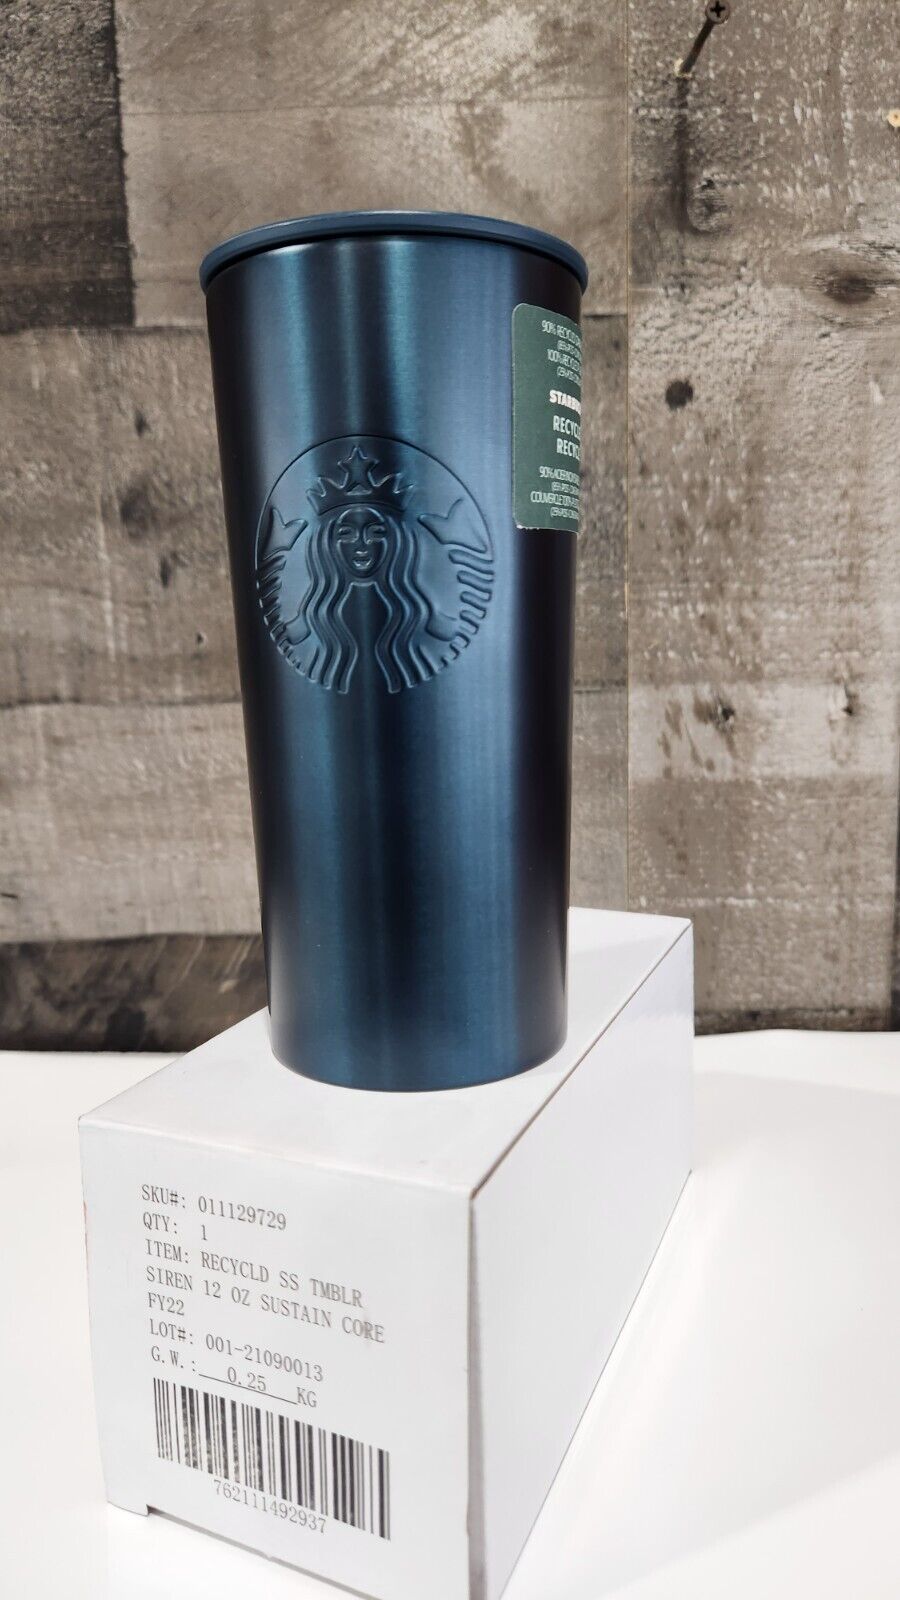 Stunning 12 oz Teal Green Starbucks Tumbler Stainless Steel for Hot & Cold Drink